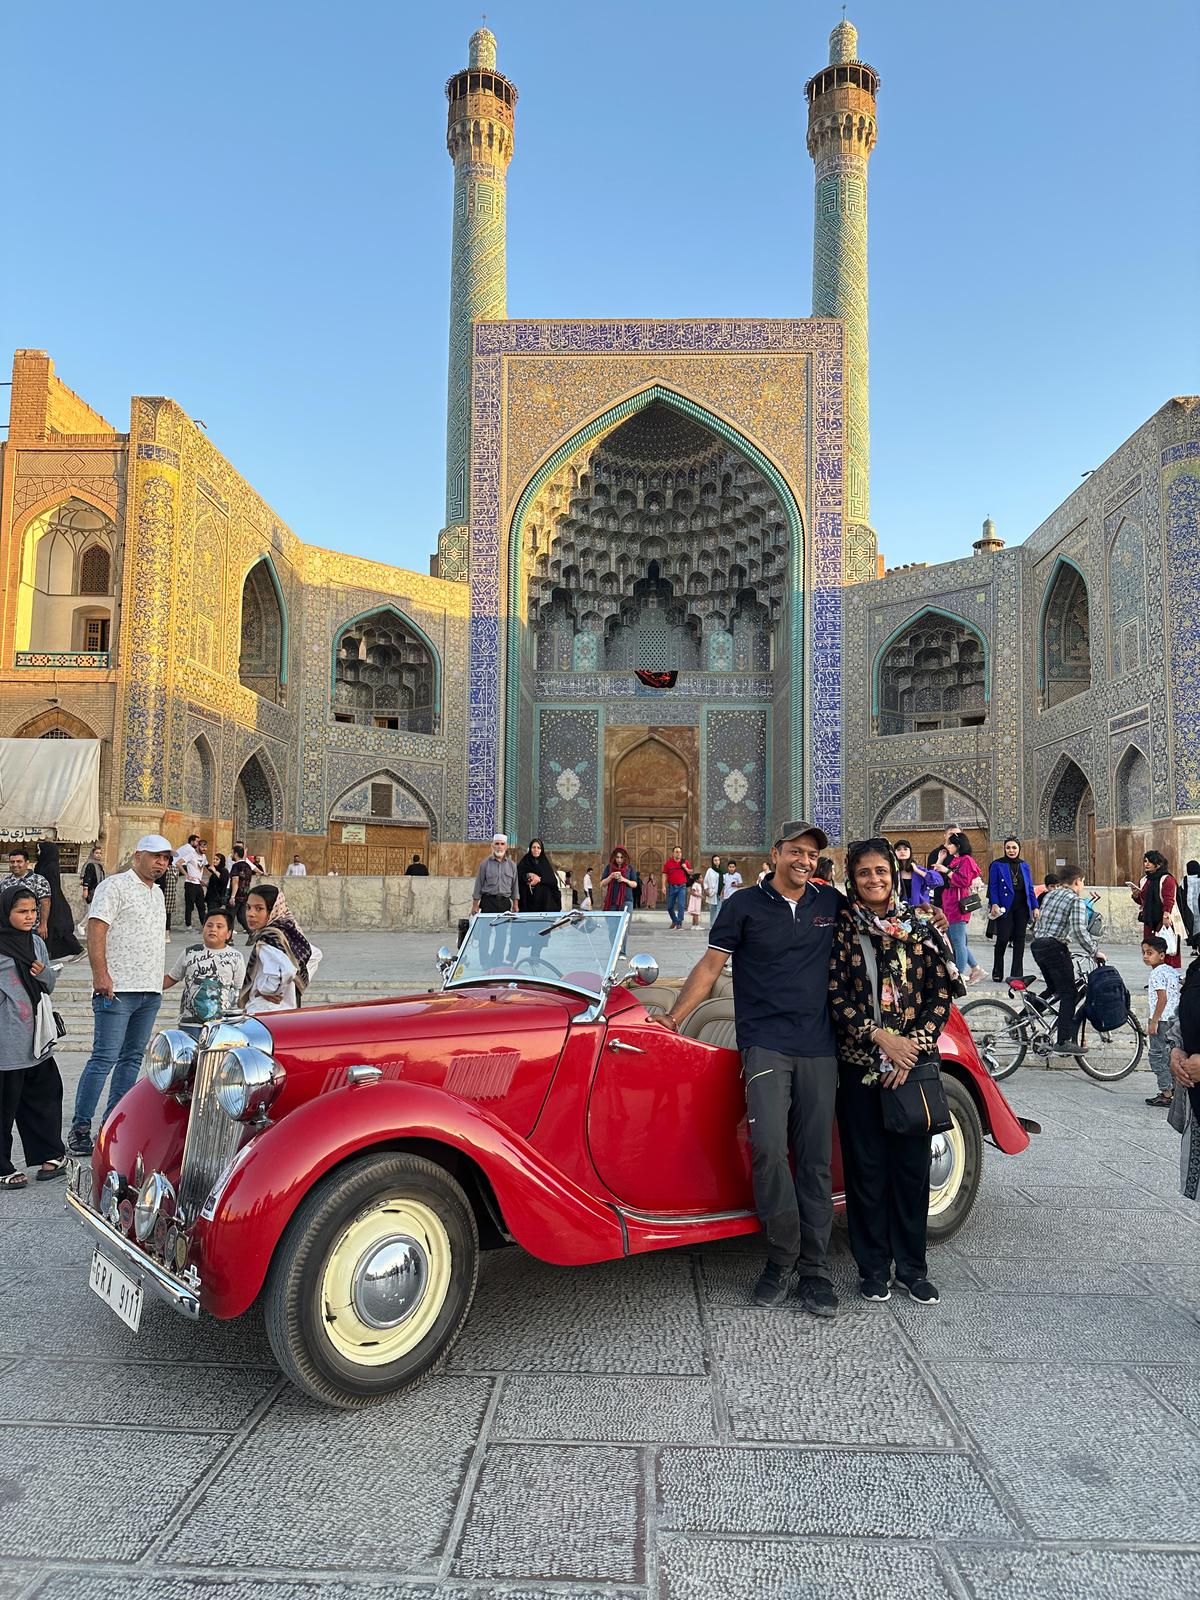 In front of the Shah Mosque in Iran.